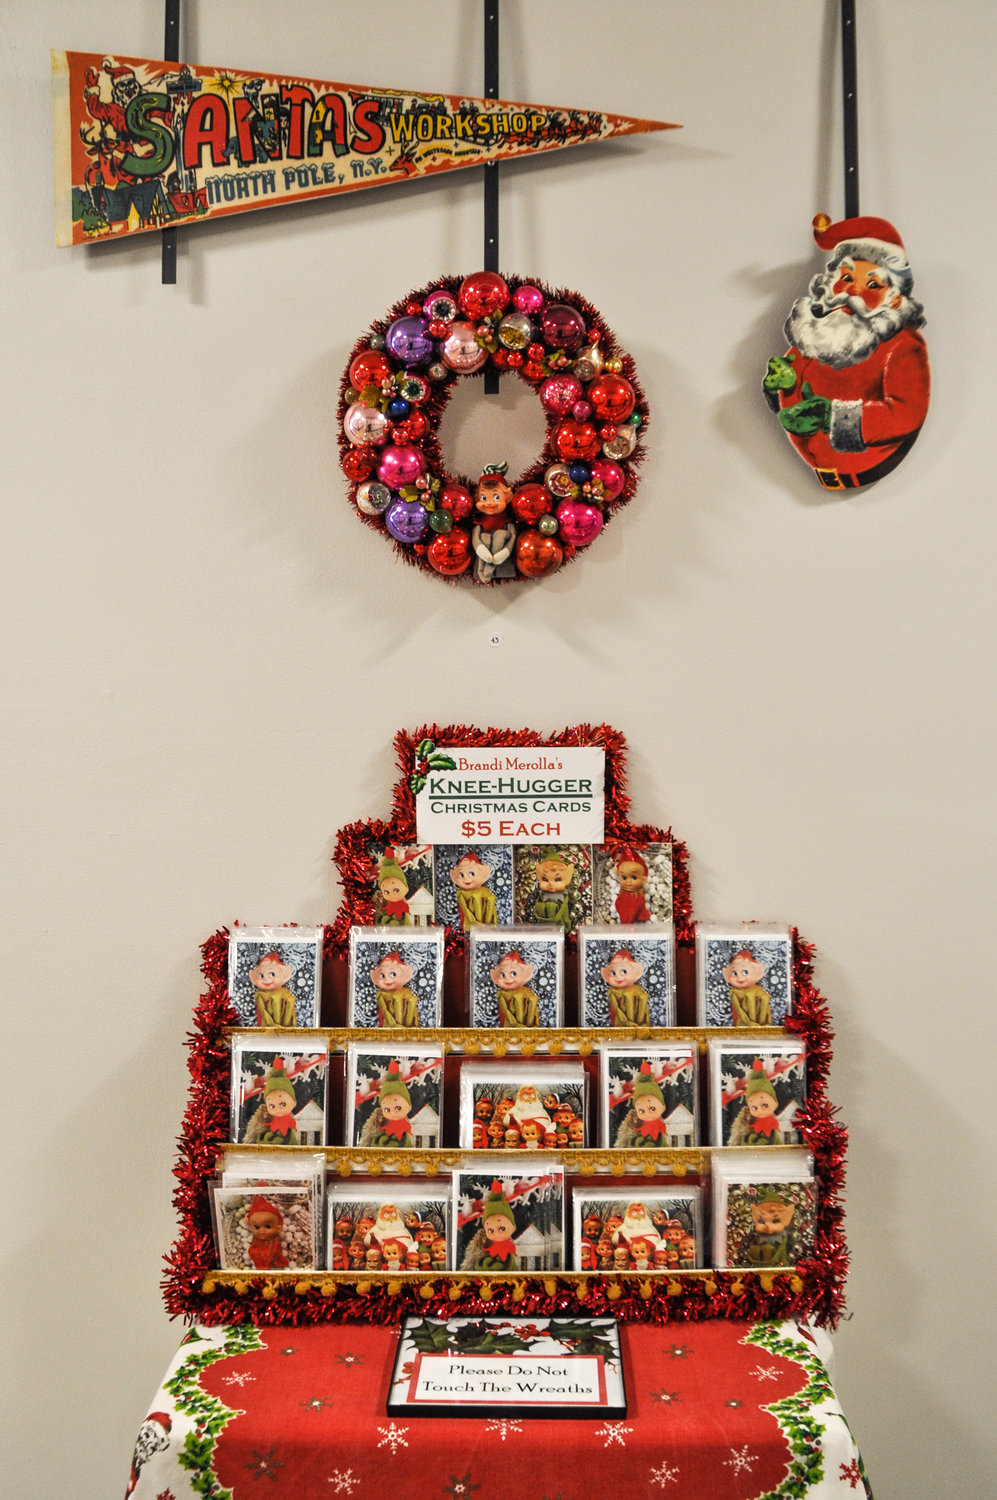 Brandi Merolla’s Vintage Ornament Wreaths Show is at the Narrowsburg Union through January 4, 2021.